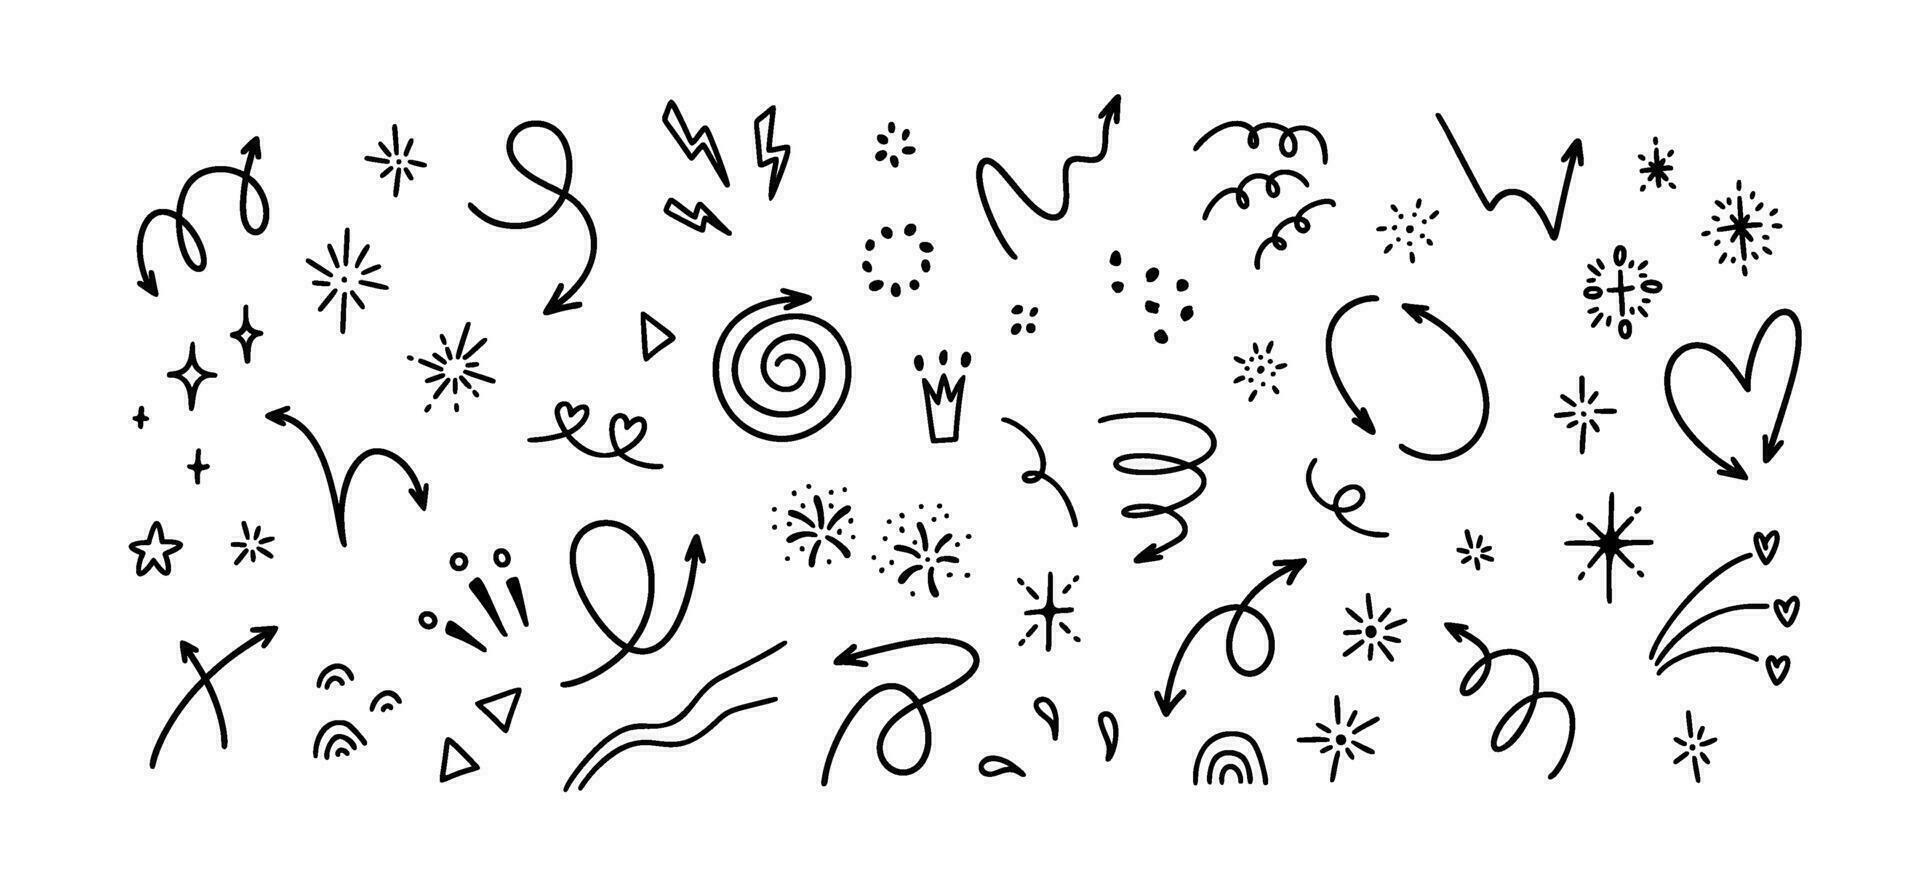 Cute line doodle handwritting elements set. Hand drawn sketchy curve arrows, glitter, stars, confetti, firework, heart, burst. Holiday, surprise, celebration decorative simple icons vector